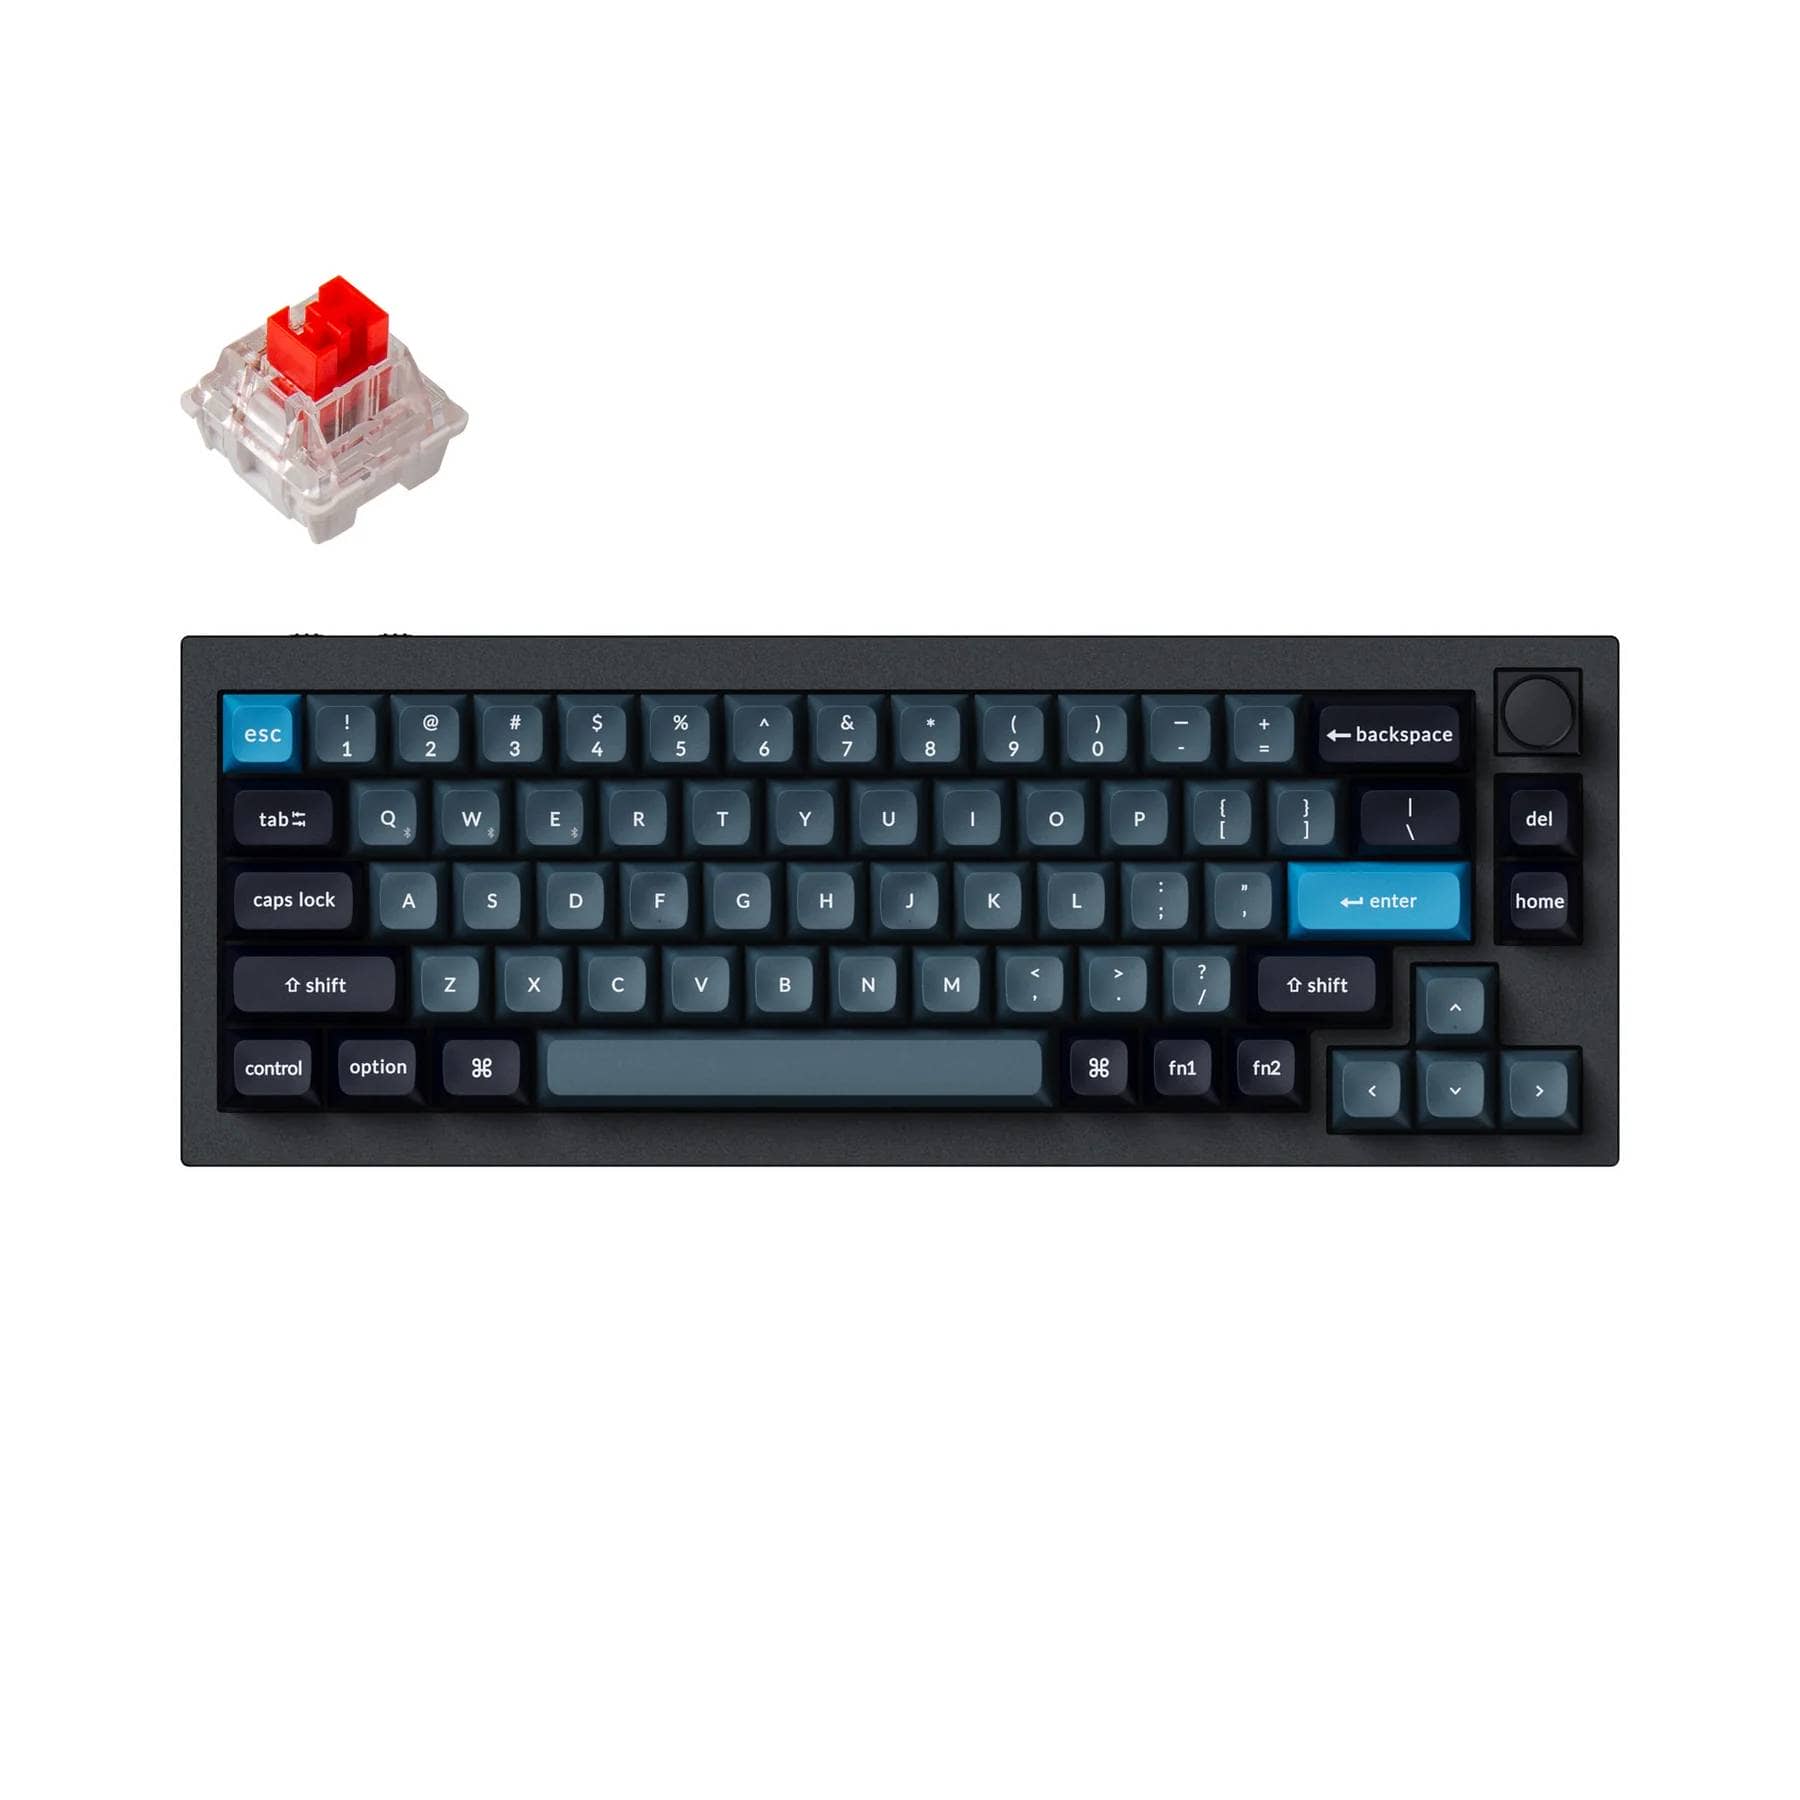 Keychron Q2 Pro QMK VIA wireless custom mechanical keyboard 65 percent layout full aluminum black frame for Mac WIndows Linux with RGB backlight and hot swappable K Pro switch